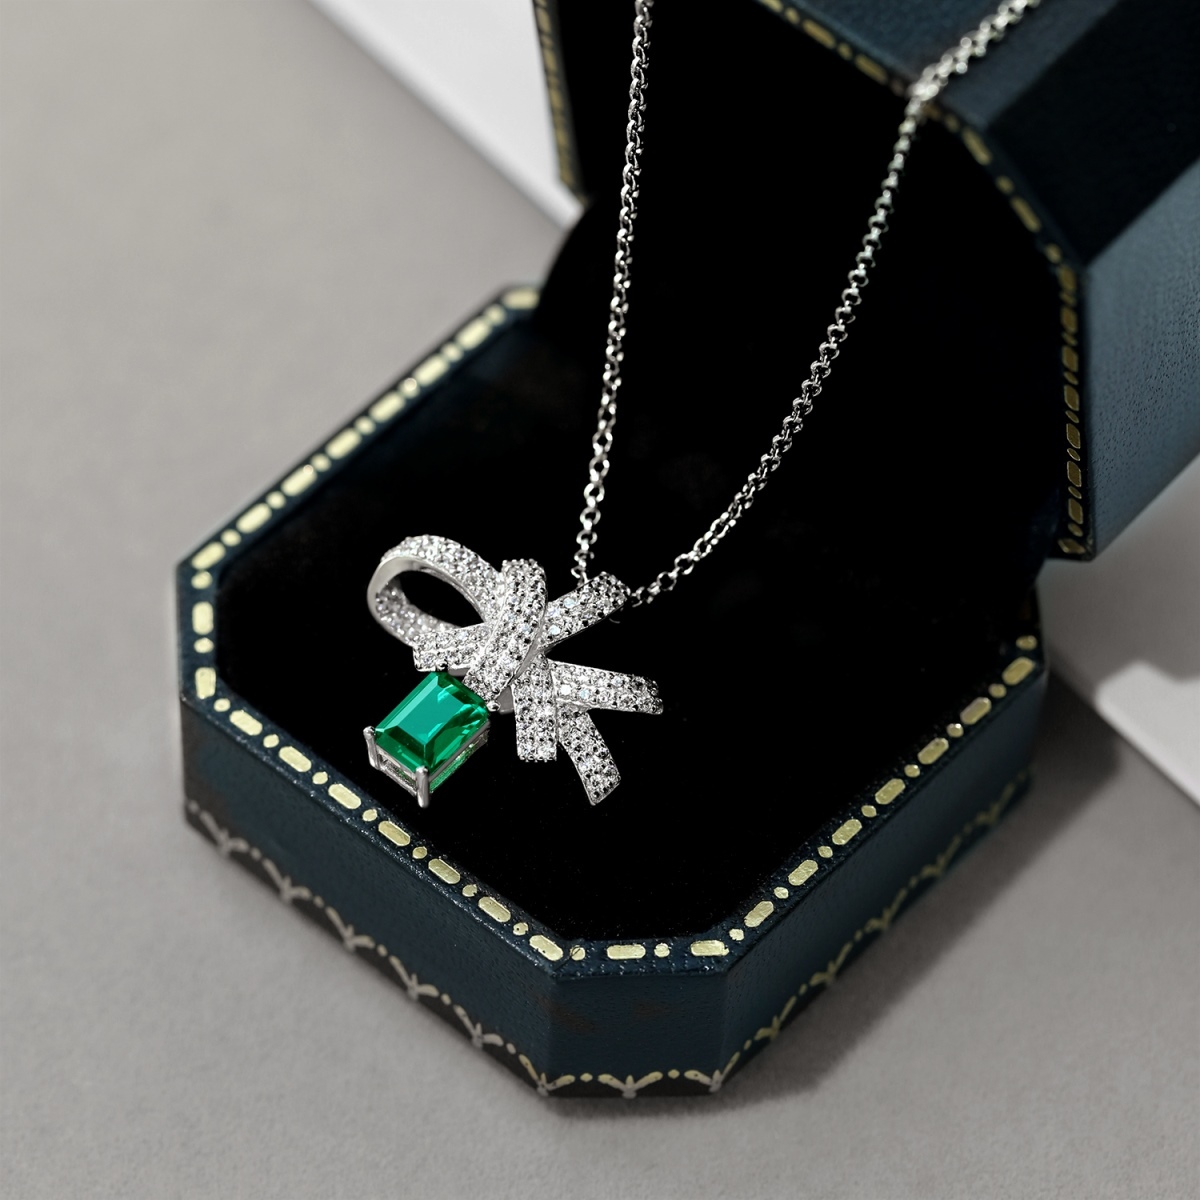 Delicate Bow Emerald Sterling Silver Necklace